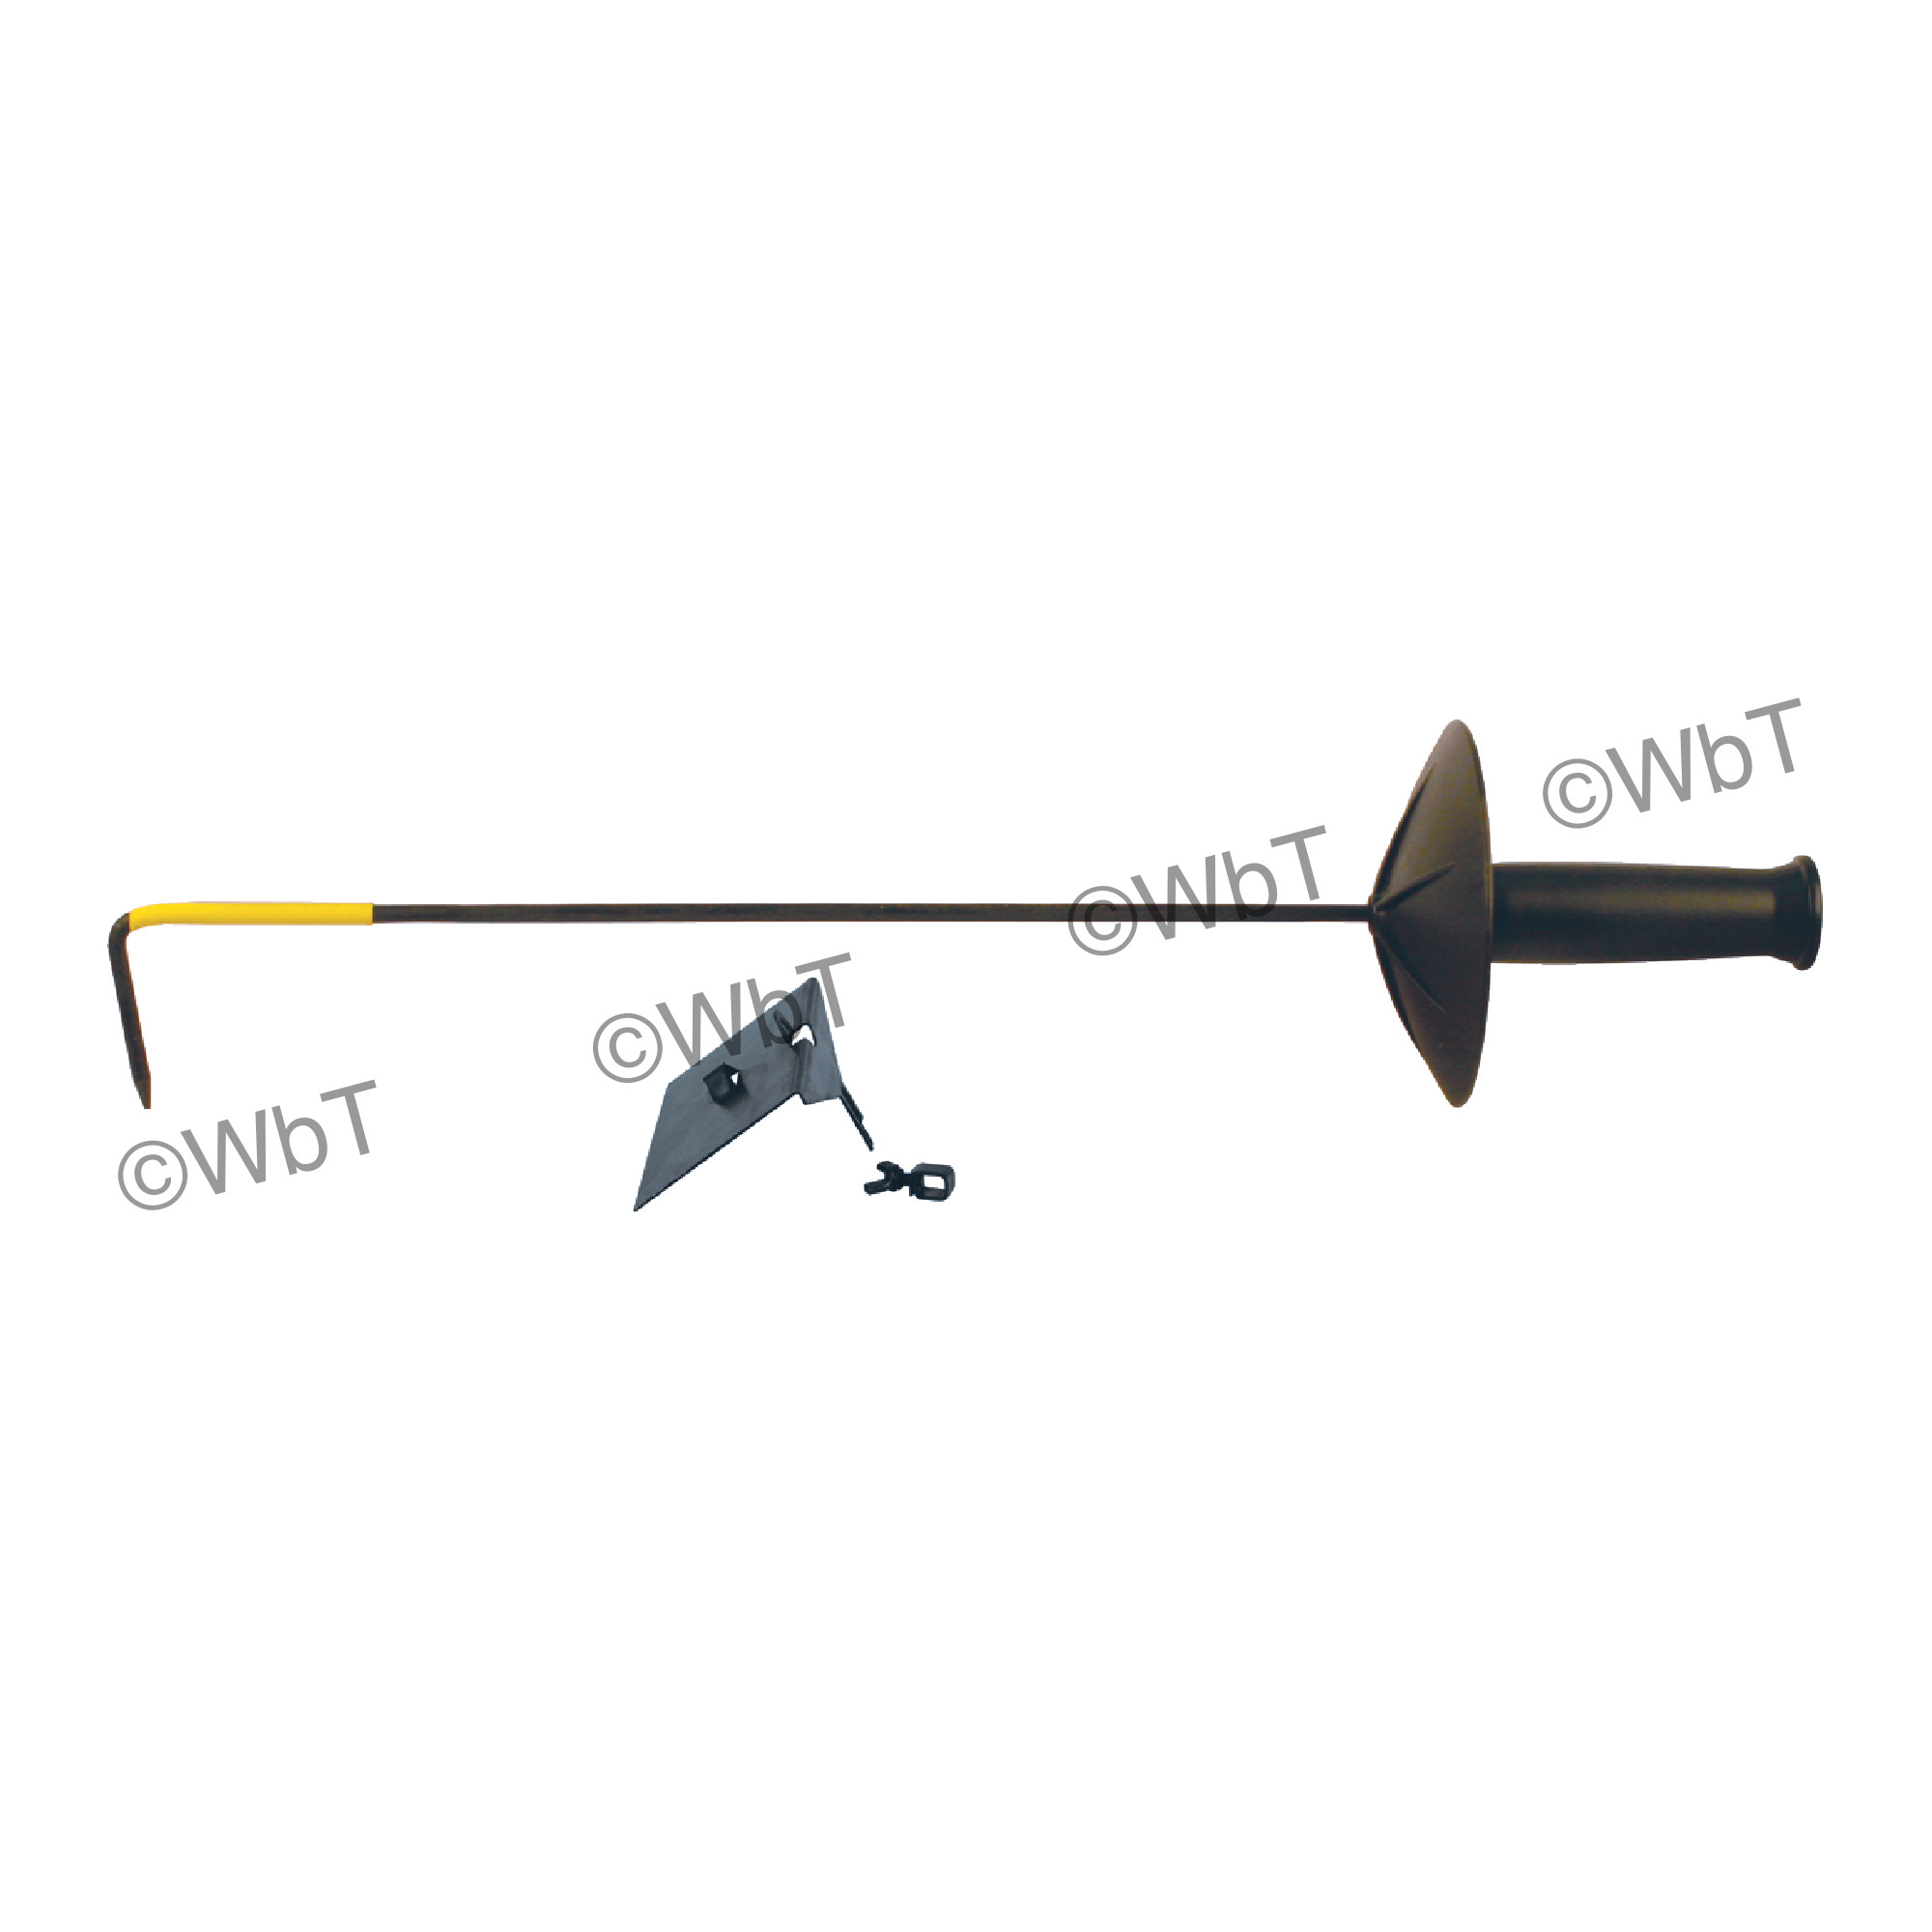 Chip Removal Tool With Shovel